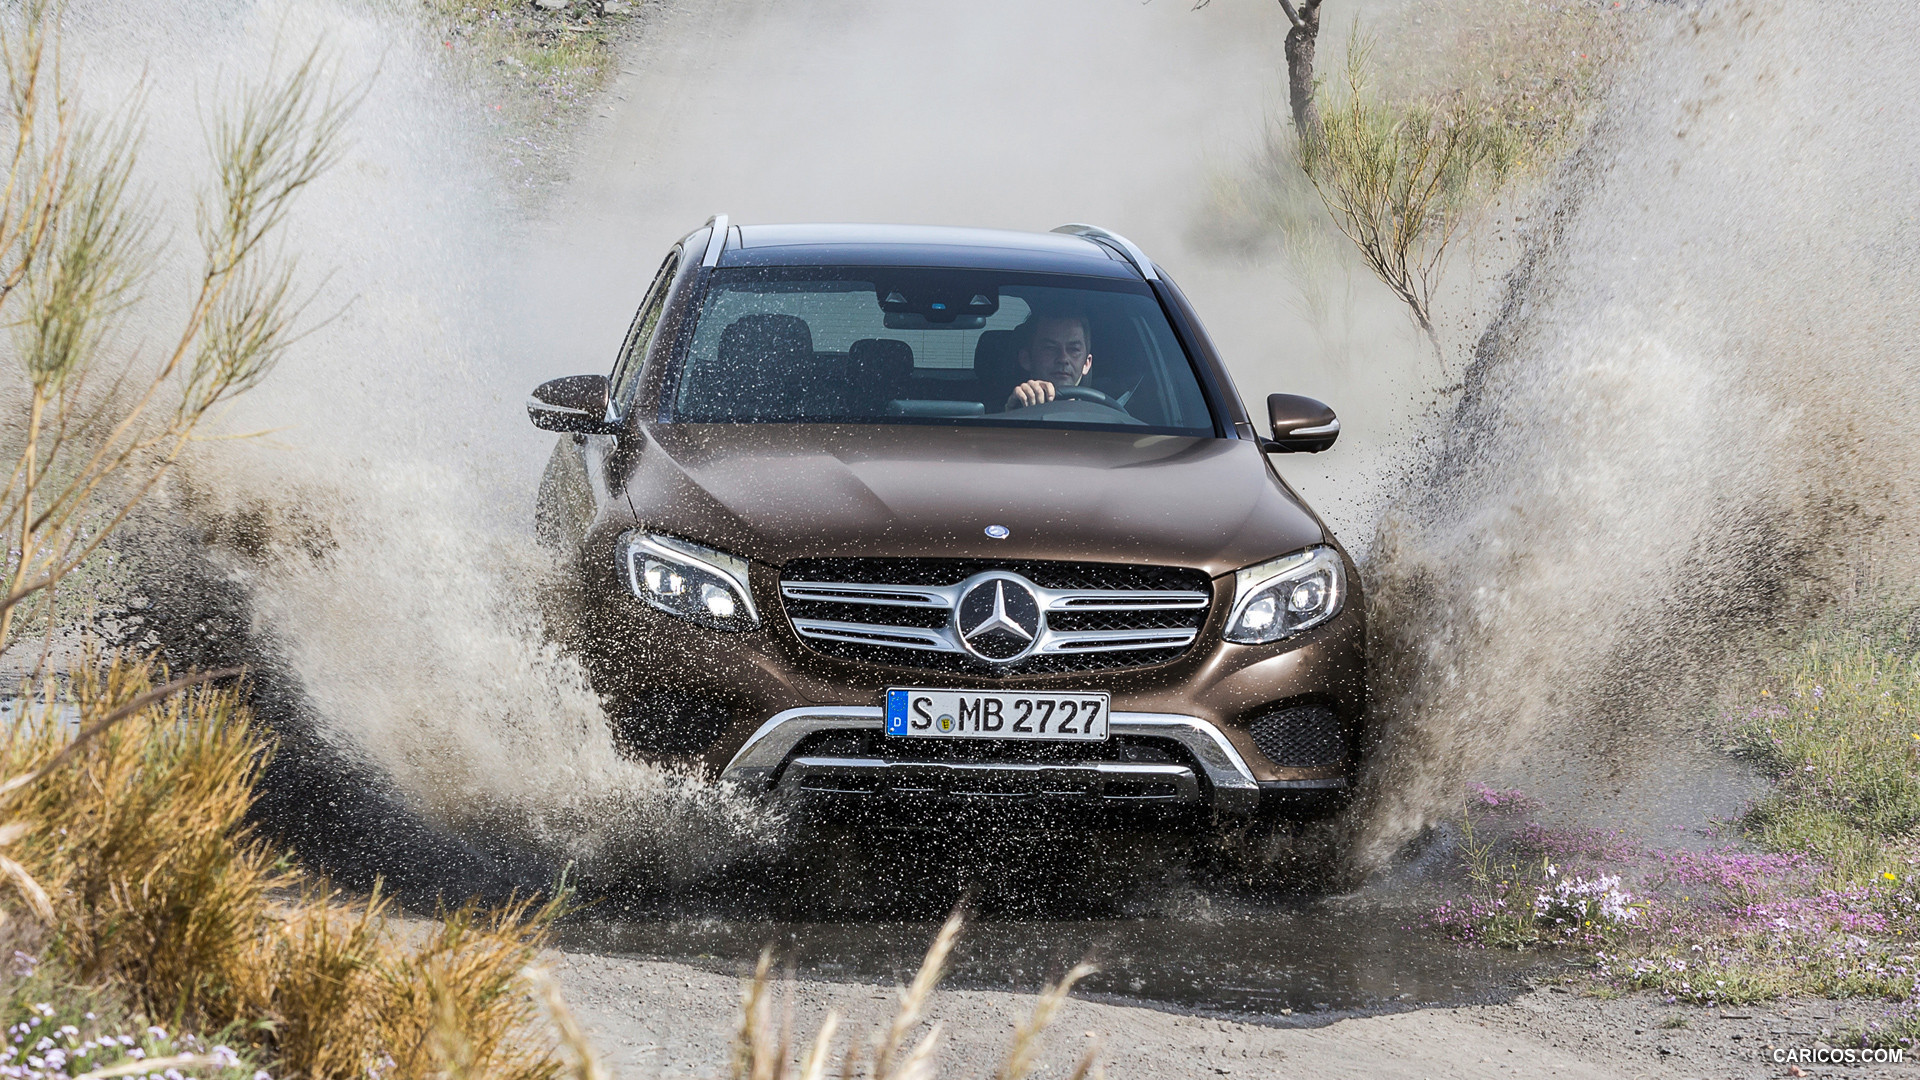 2016 Mercedes-Benz GLC-Class GLC 250d 4MATIC (Citrine Brown Magno, Offroad Line) - Front, #13 of 254